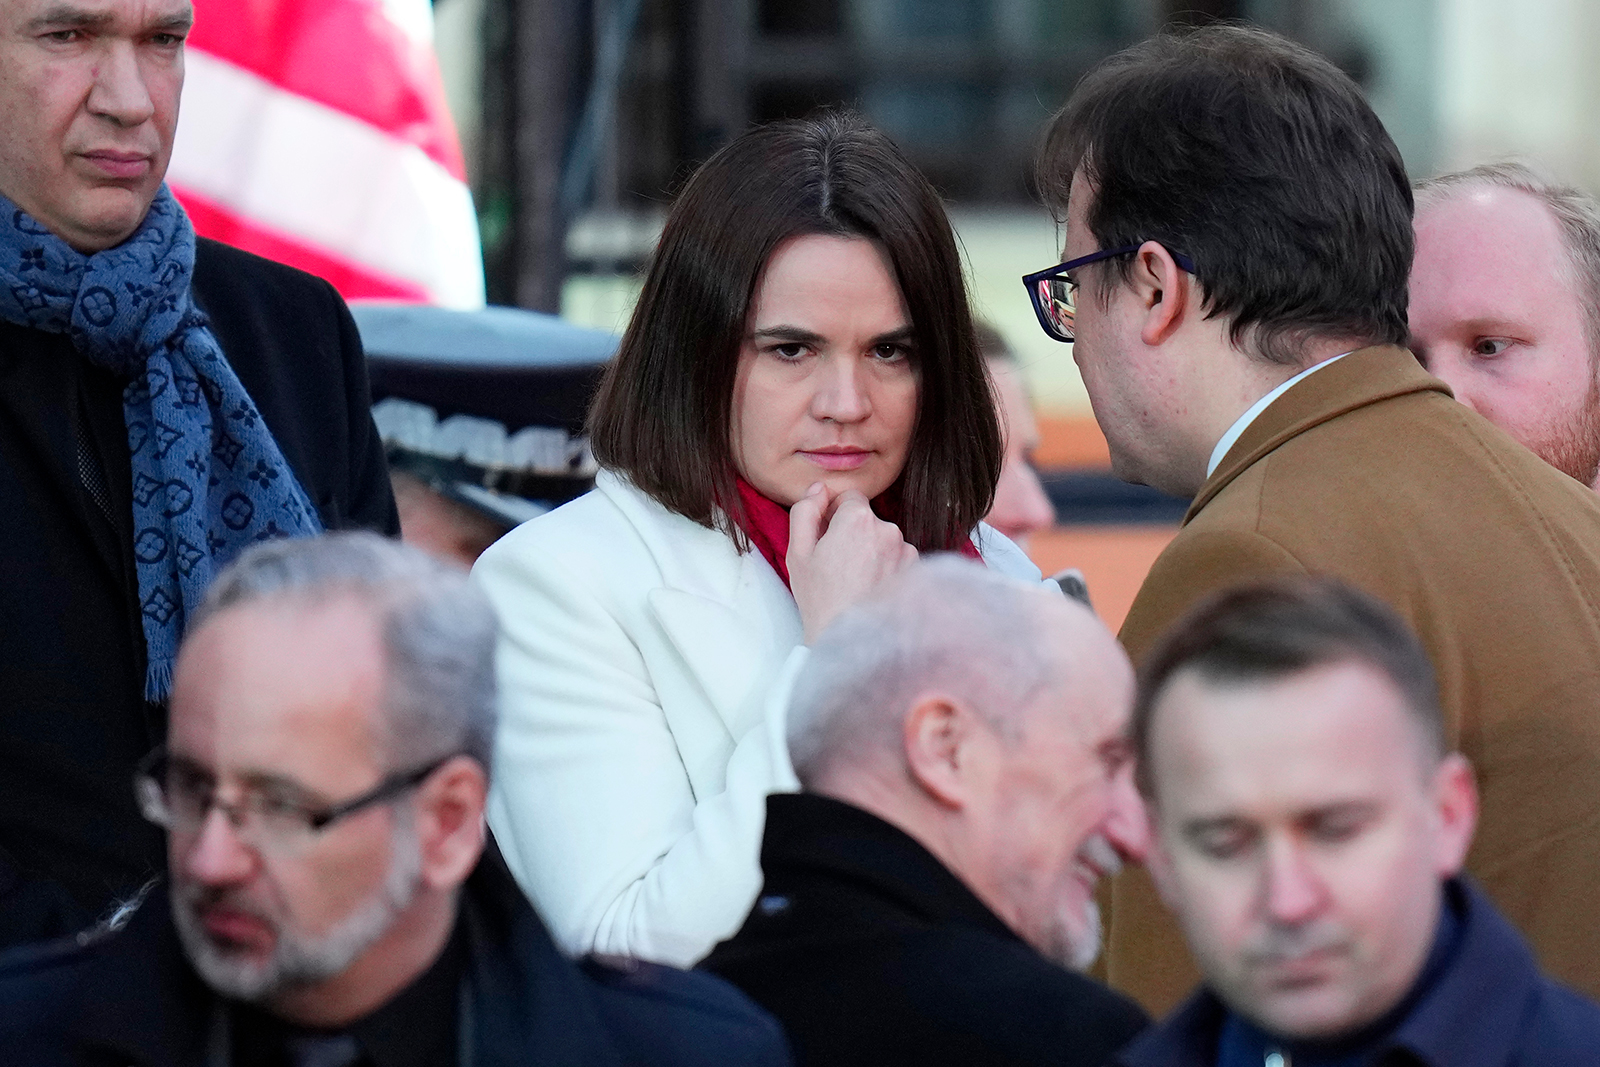 Belarusian opposition leader Sviatlana Tsikhanouskaya, center, waits for President Joe Biden to deliver a speech at the Royal Castle in Warsaw, Poland, Saturday, March 26.